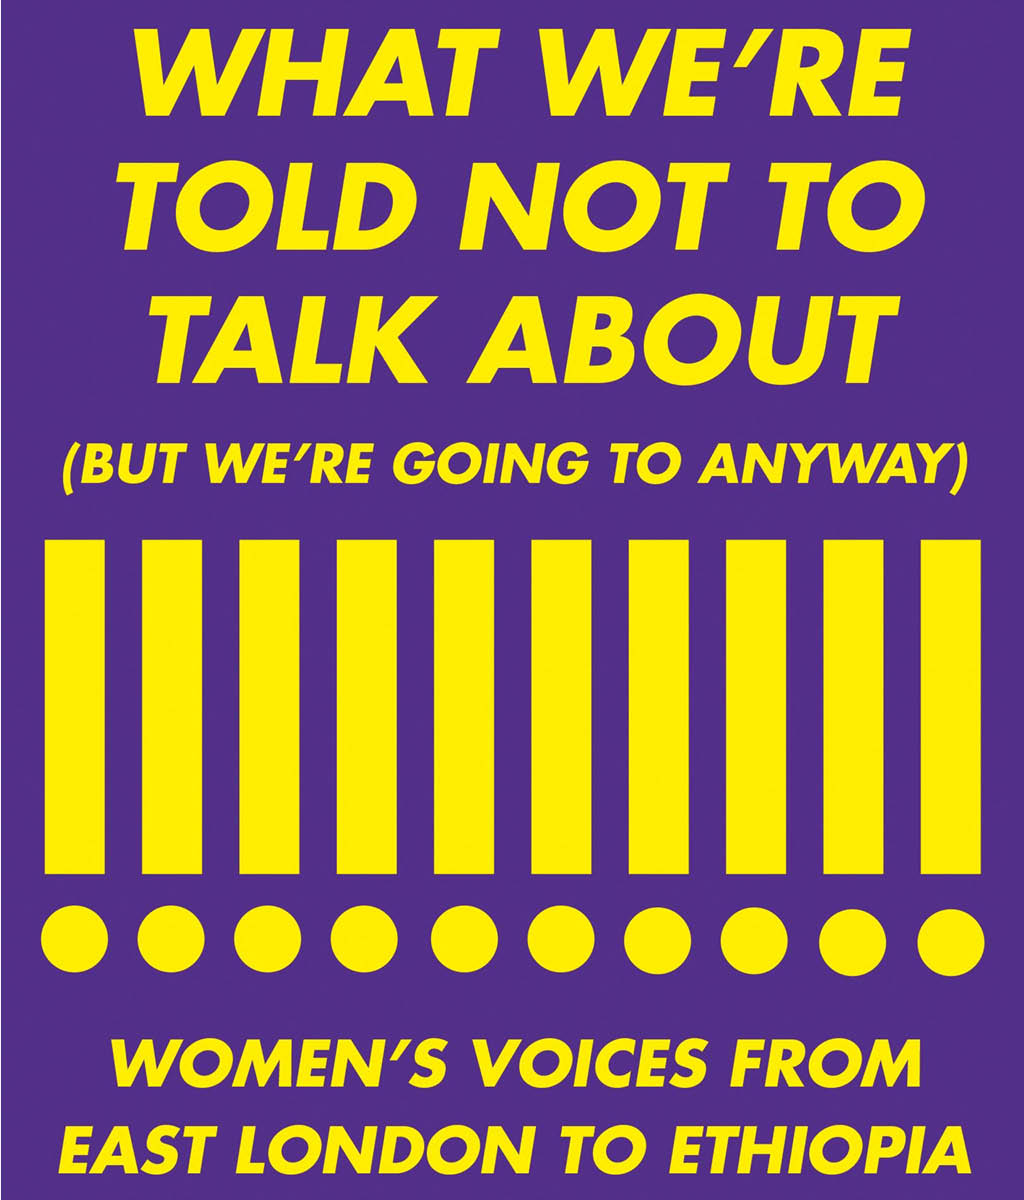 What We're Told Not to Talk About (But We're Going to Anyway) : Women's Voices from East London to Ethiopia by Nimko Ali